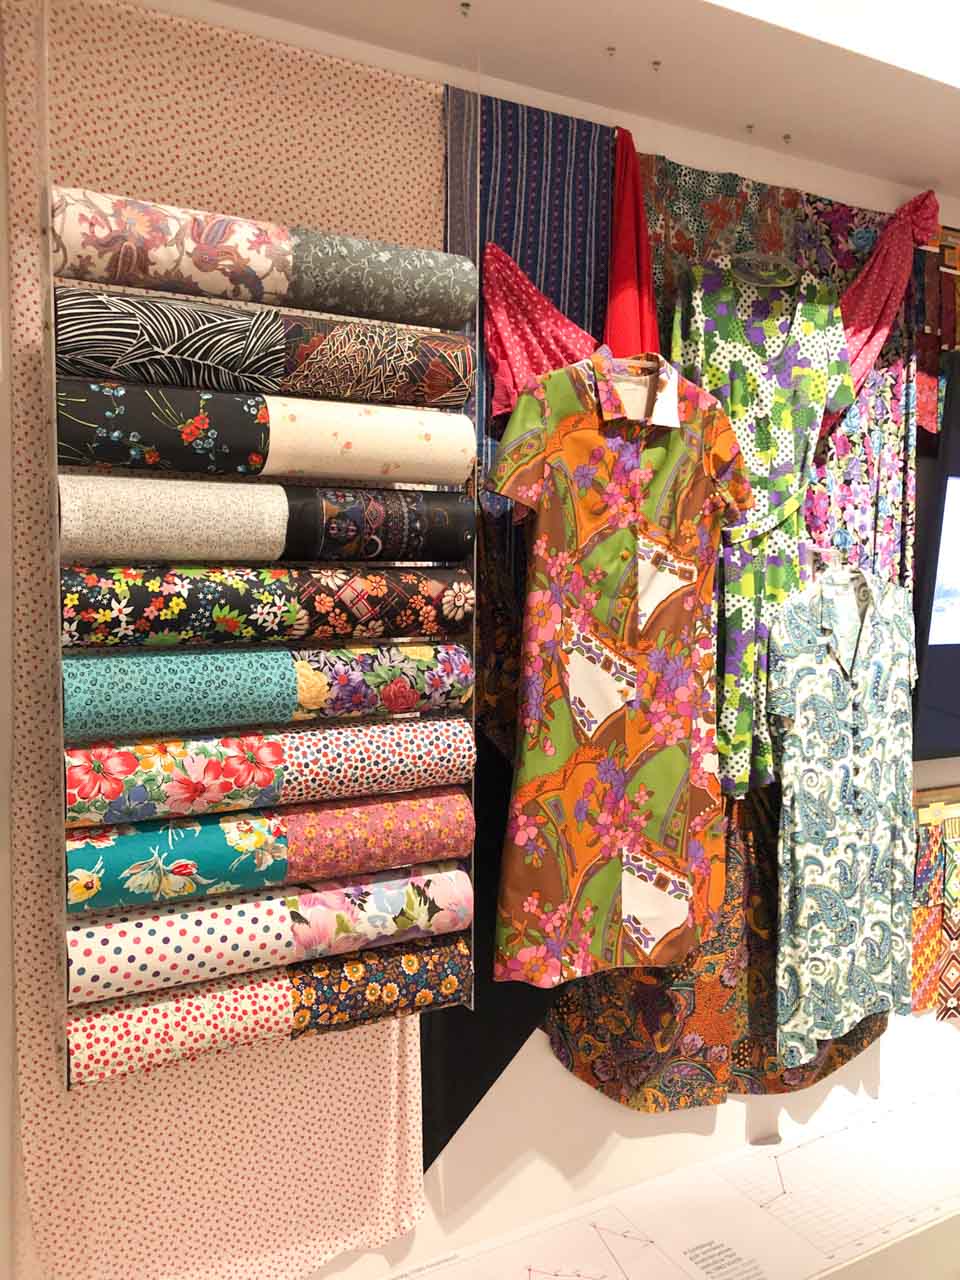 Rolls of printed fabric next to some hanging printed garments